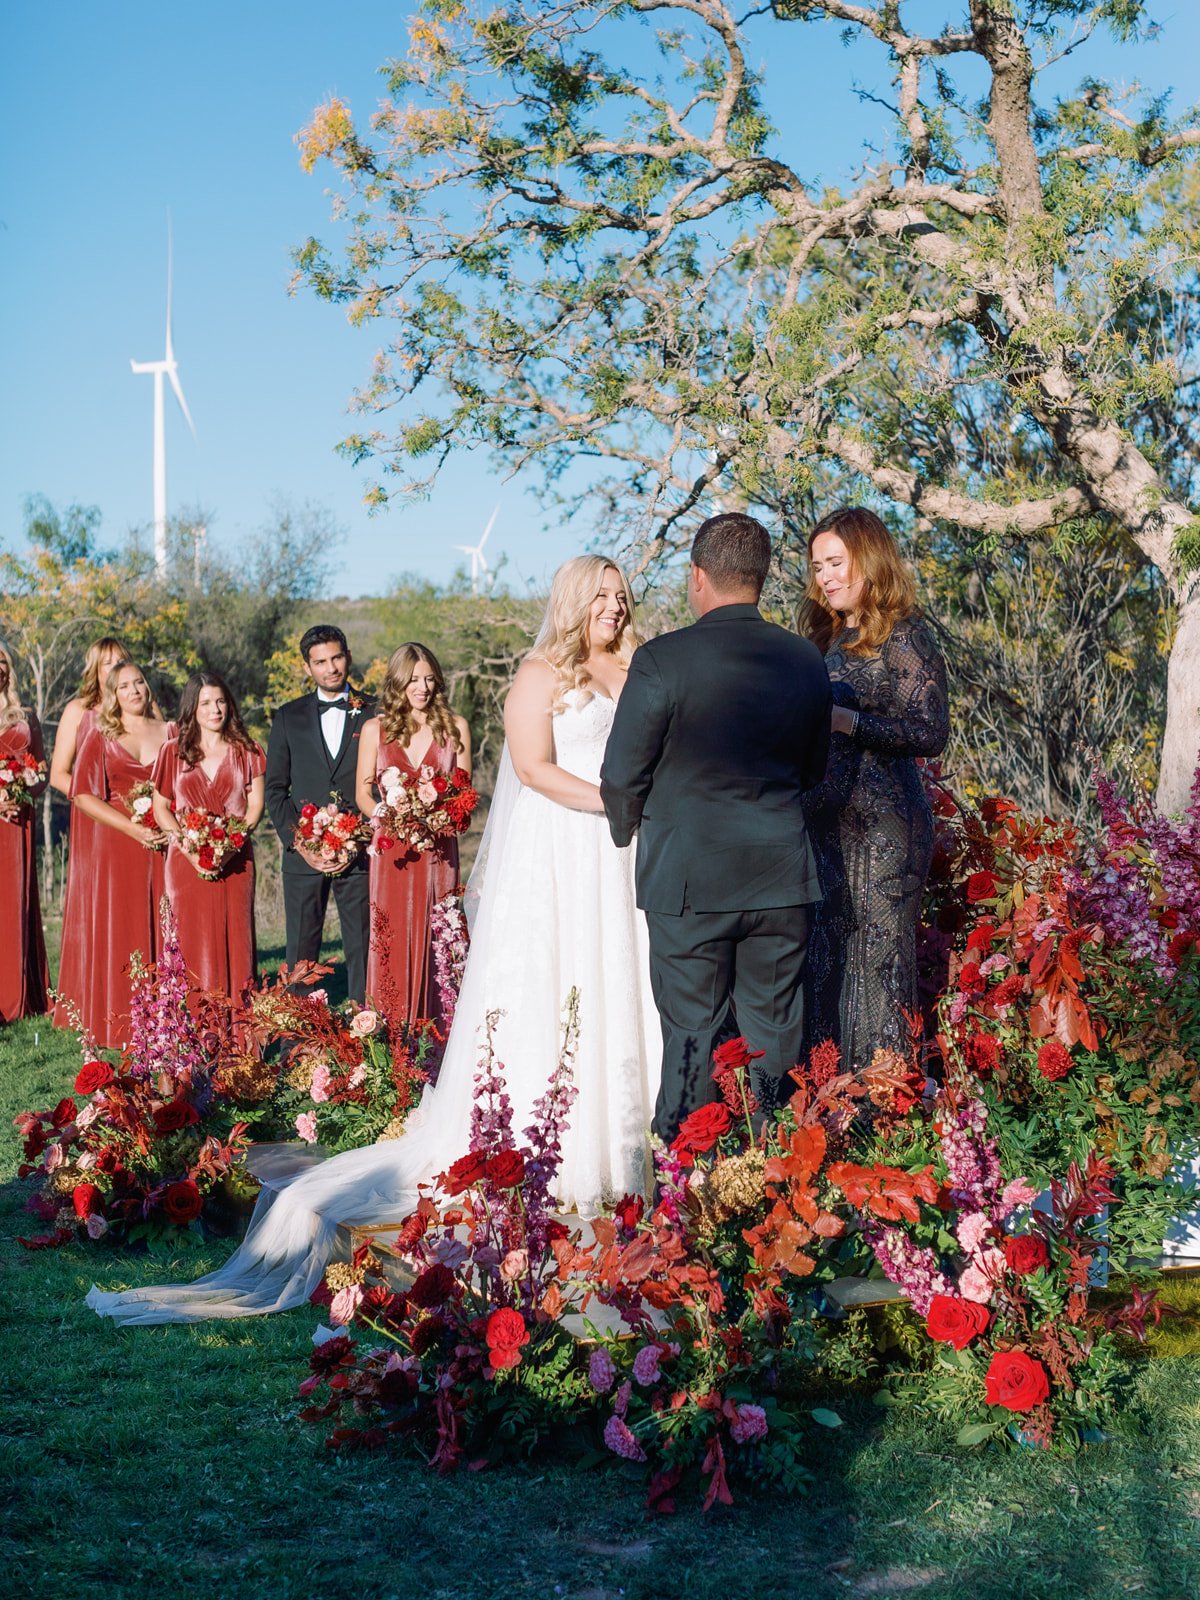 Outdoor wedding ceremony with a red halo flowers at Texas wedding